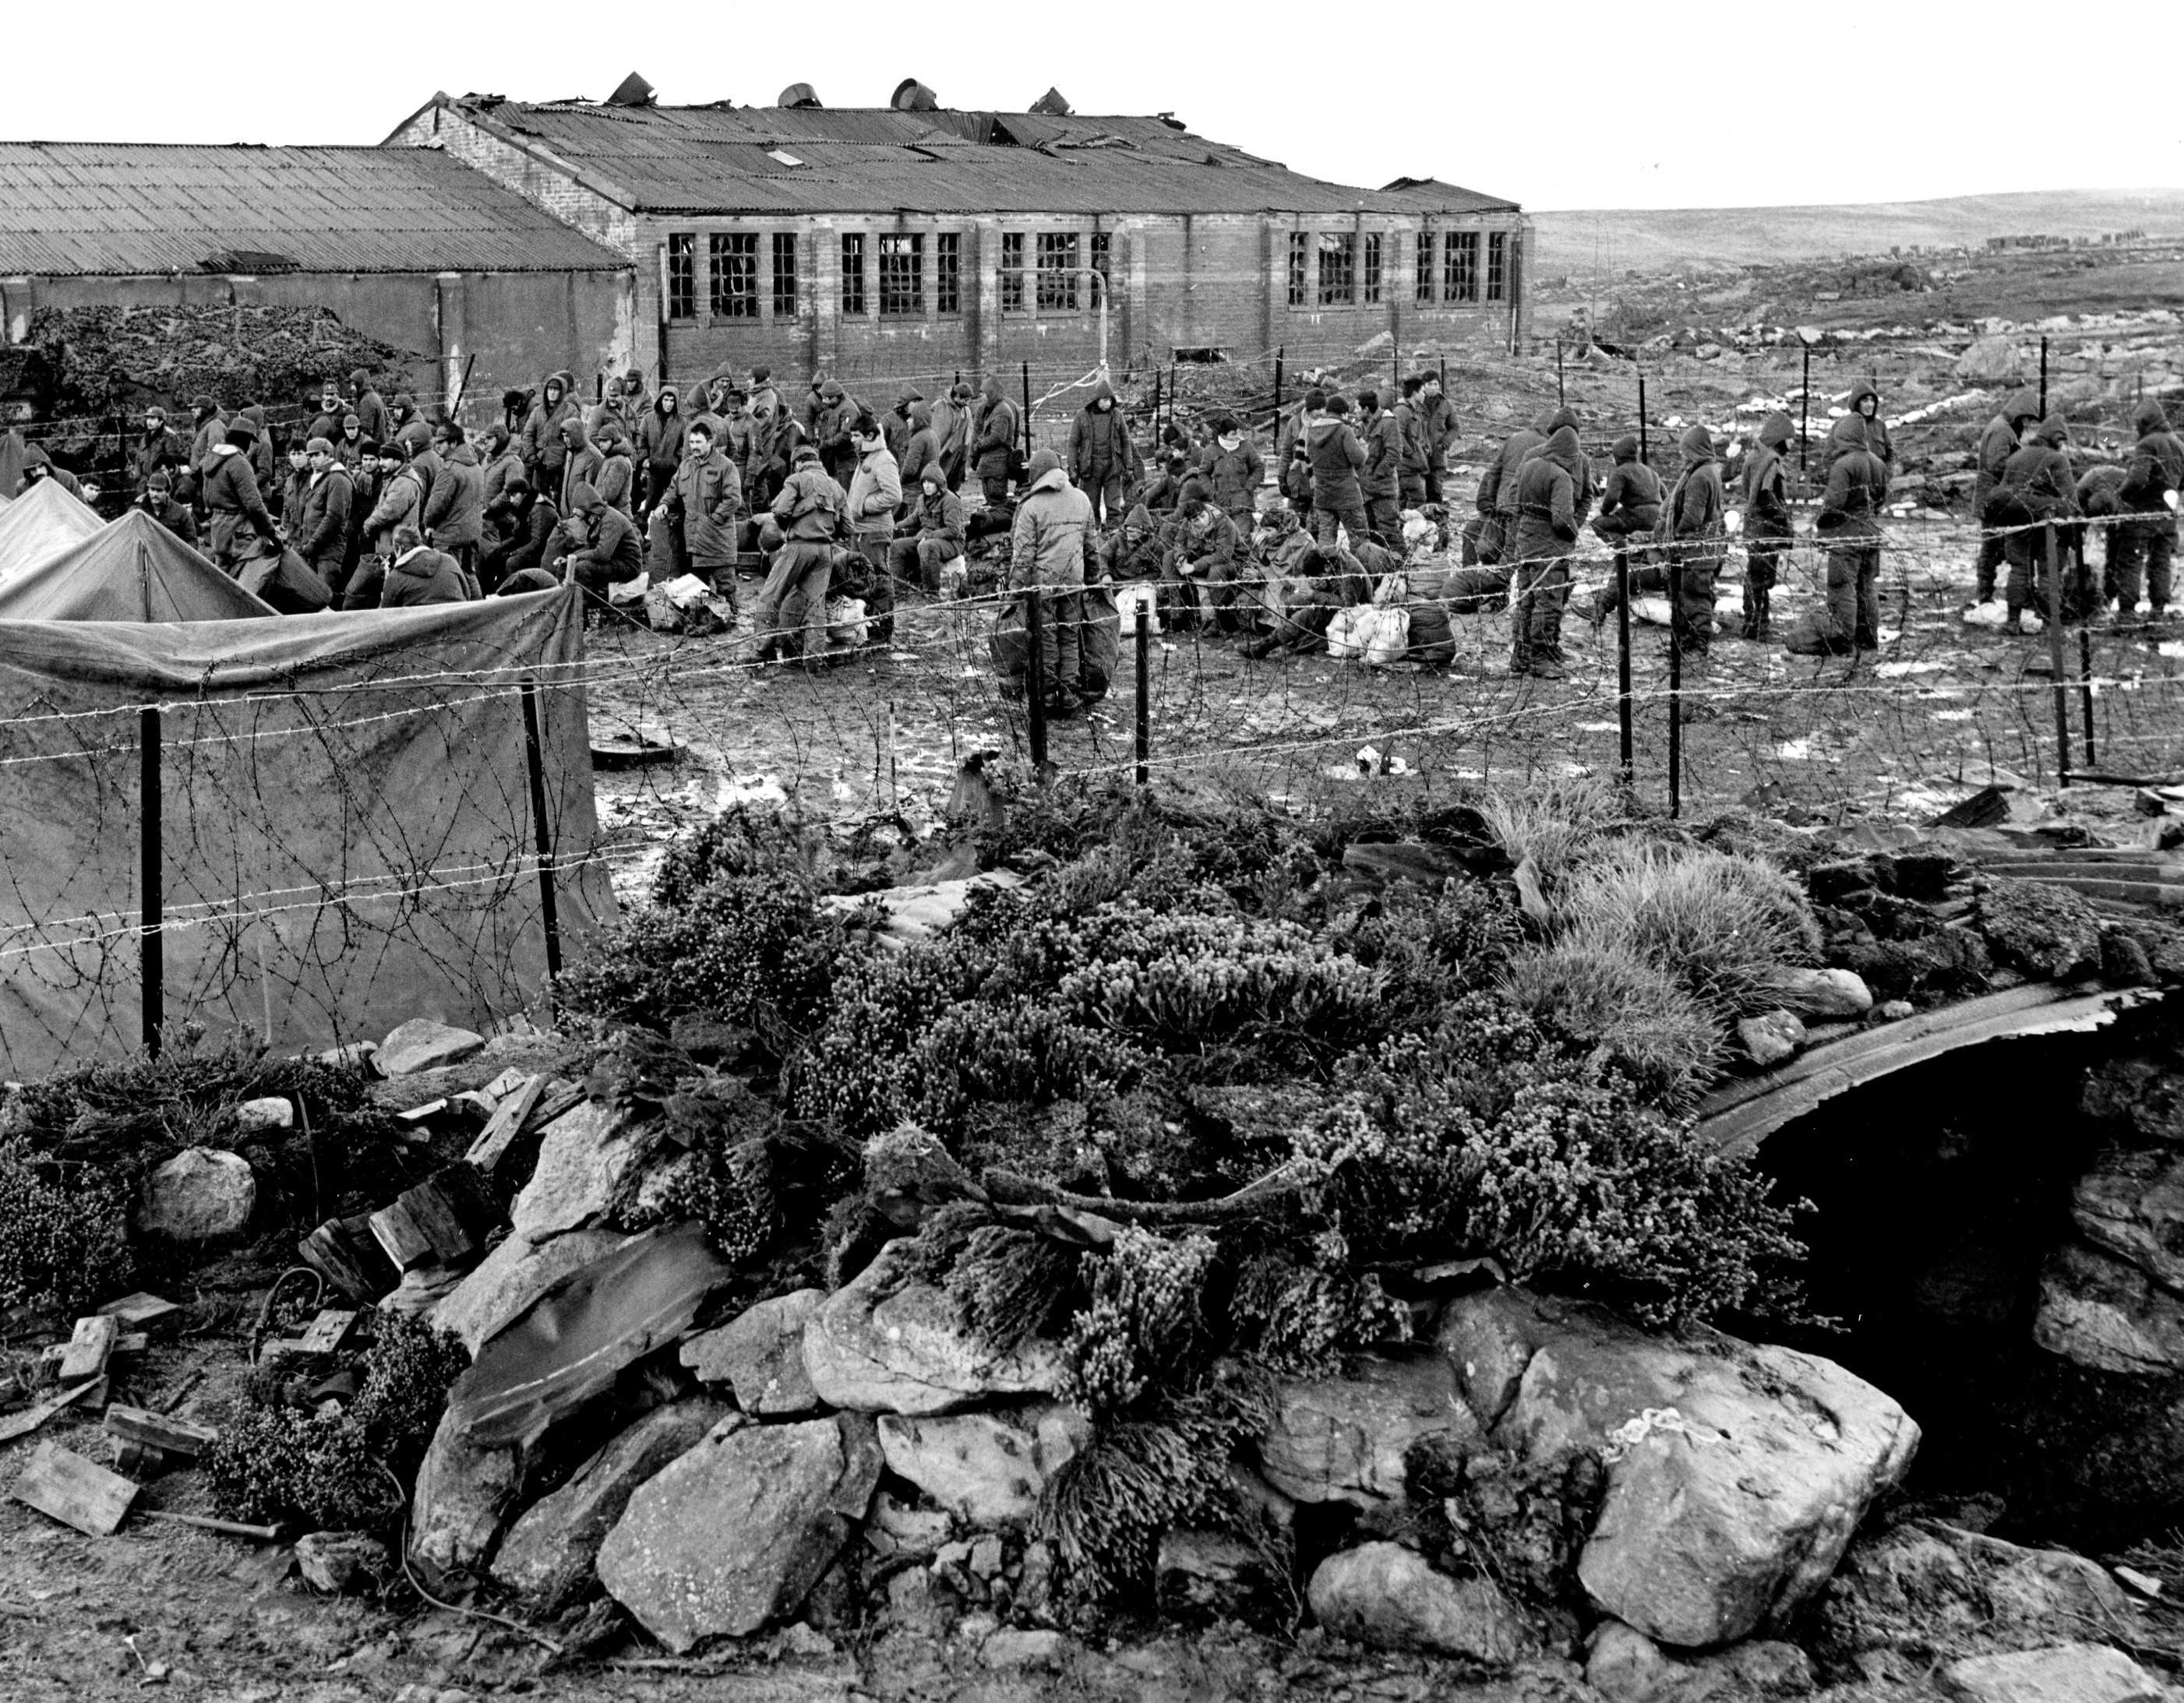 Argentinian soldiers in a makeshift POW camp somewhere on the Falkland Islands during the Falkland War in 1982. Disputes over the island triggered Argentina to occupy them. The UK would not stand for that, and launched an invasion to reclaim the islands. The 2 month war was won by the UK, who lost 225 killed with another 1000 casualties. Argentina lost 649 killed and another 13,000 casualties. The British also accidentally killed 3 civilians with inaccurate shelling. The way the British forced the issue for islands that were believed to have no real value surprised the world. In the end though, no other nation stepped in outside of debates on the UN floor.